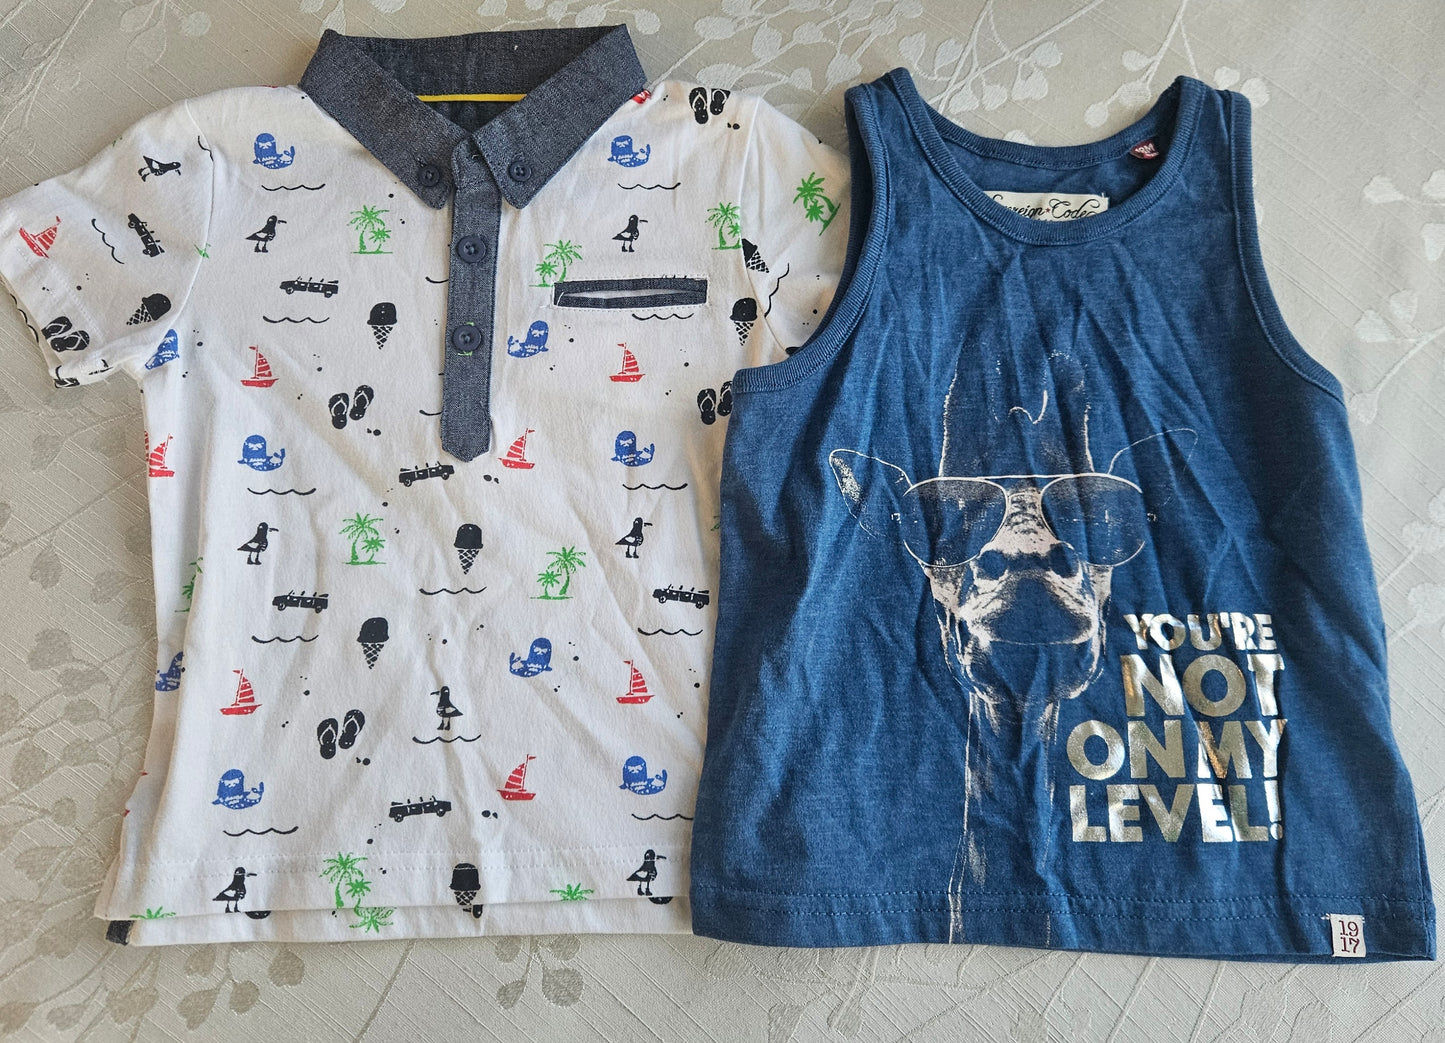 Sovereign Code Los Angeles Shirt Lot - 18 months